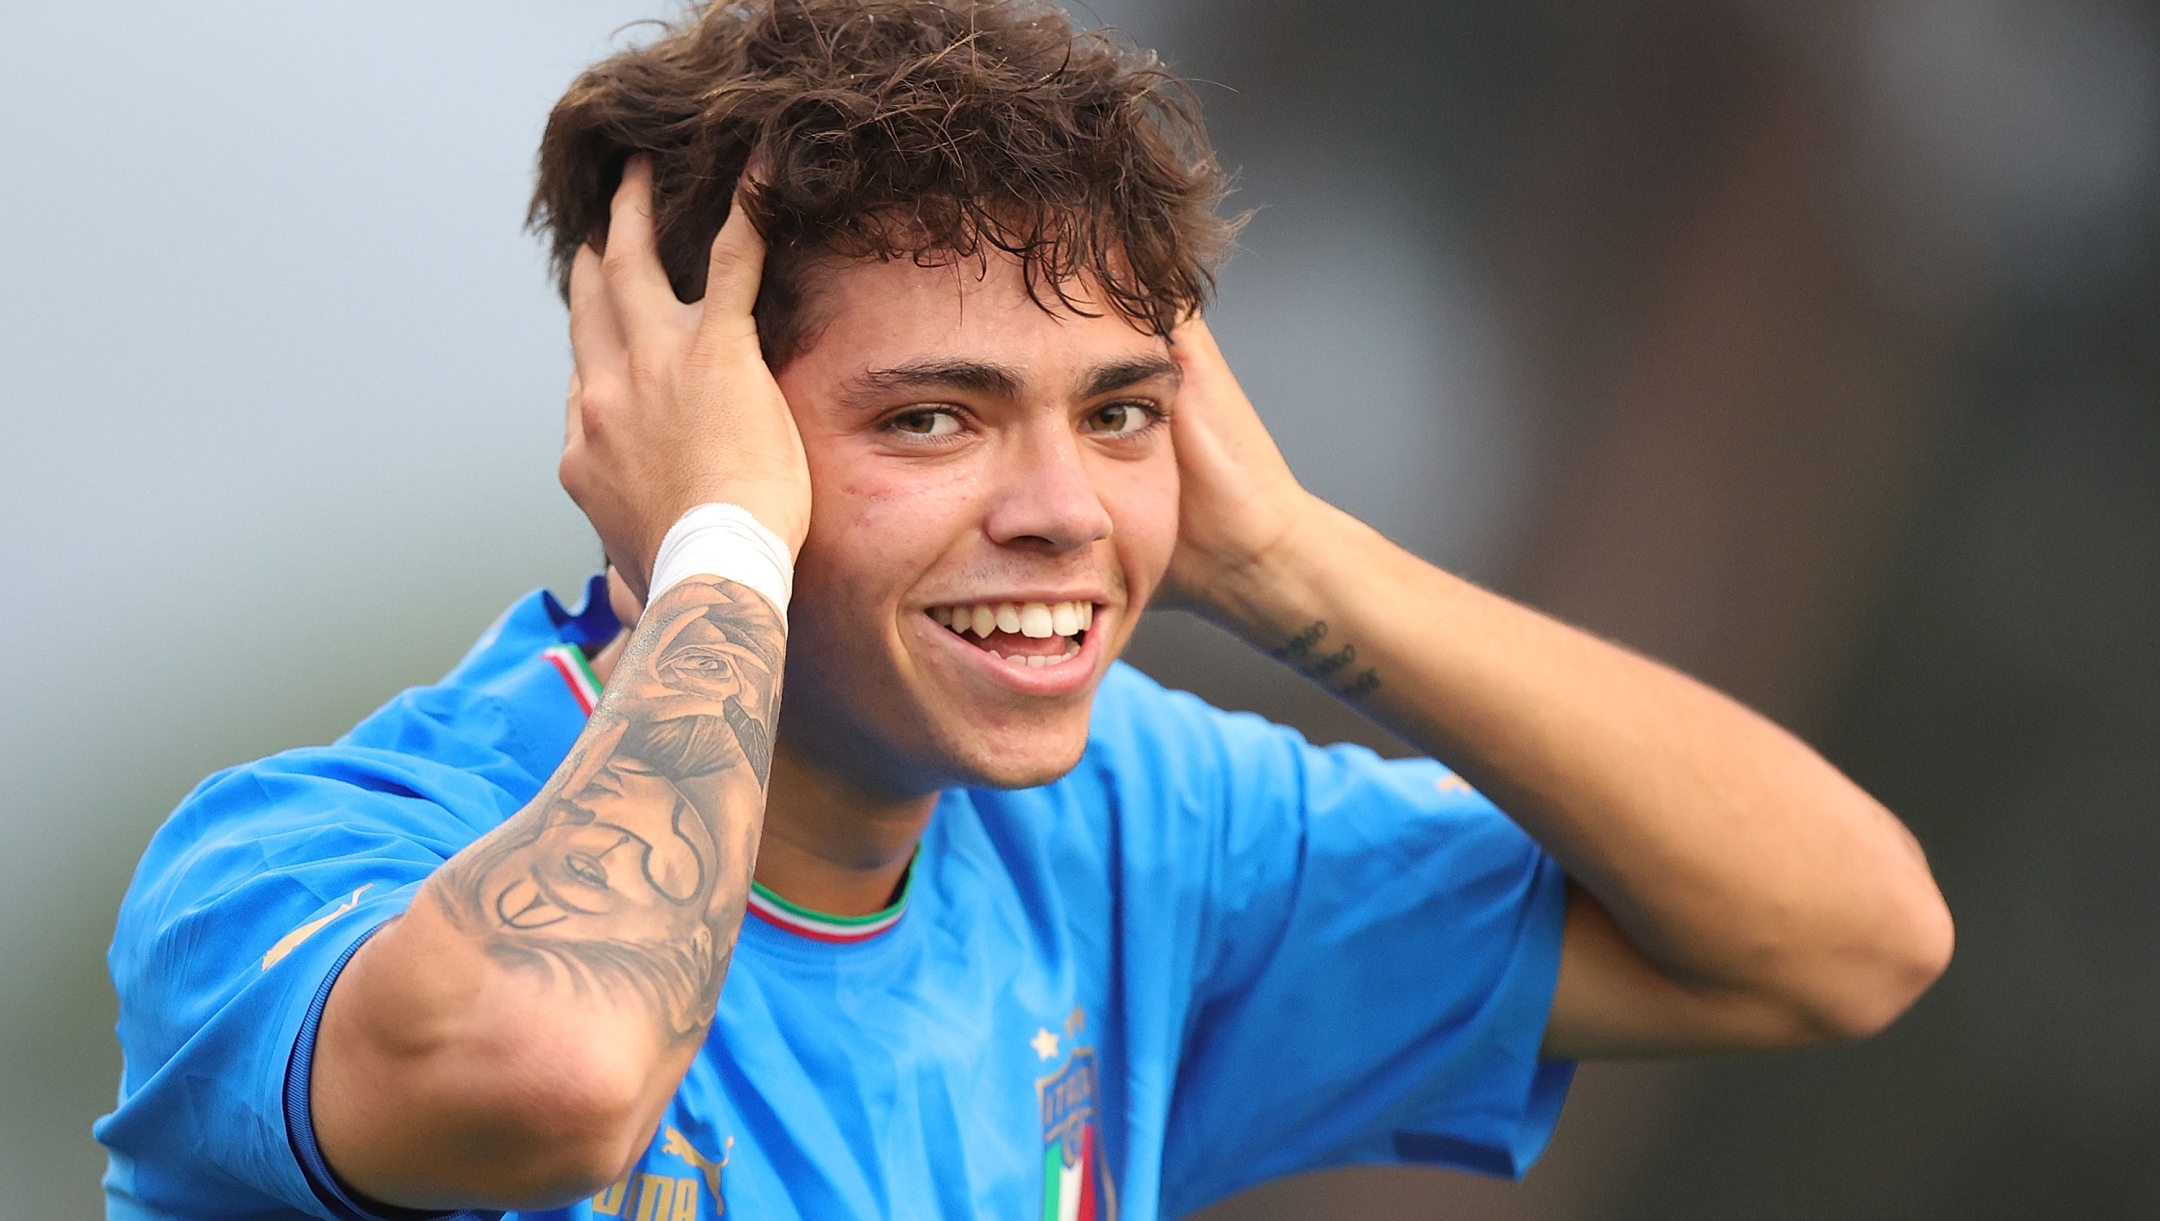 FLORENCE, ITALY - NOVEMBER 16: Samuele Vignato of Italy U19 celebrates after scoring a goal the friendly match between Italy U19 and Hungary U19 at Centro Tecnico Federale di Coverciano on November 16, 2022 in Florence, Italy.  (Photo by Gabriele Maltinti/Getty Images)